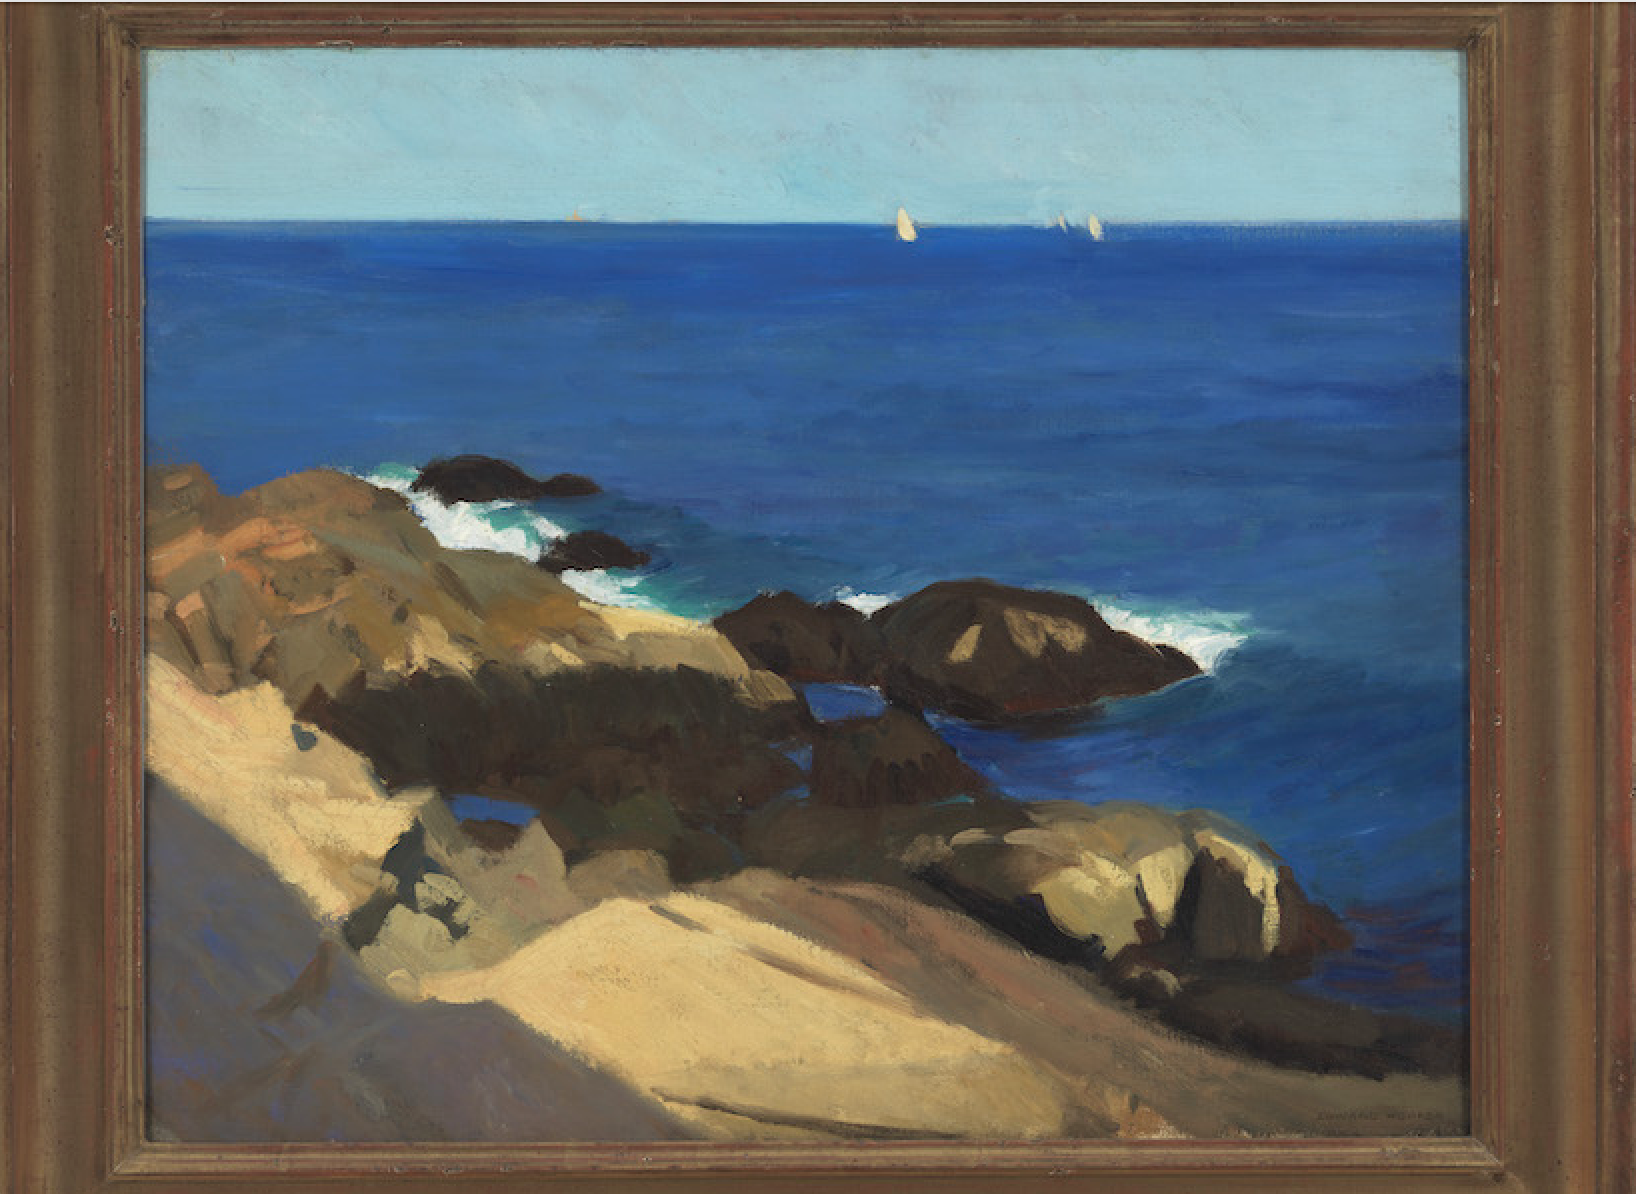 Edward Hopper, ‘Briar Neck, Gloucester,’ 1912. Oil on canvas, 24 3/16 by 29 1/8in. (61.4 by 74cm). Whitney Museum of American Art, New York, Josephine N. Hopper bequest, 70.1193. Digital image © Whitney Museum of American Art / Licensed by Scala / Art Resource, NY N.B. The correct spelling of this local landmark is Brier Neck. © 2023 Heirs of Josephine N. Hopper / Licensed by Artists Rights Society (ARS), NY 